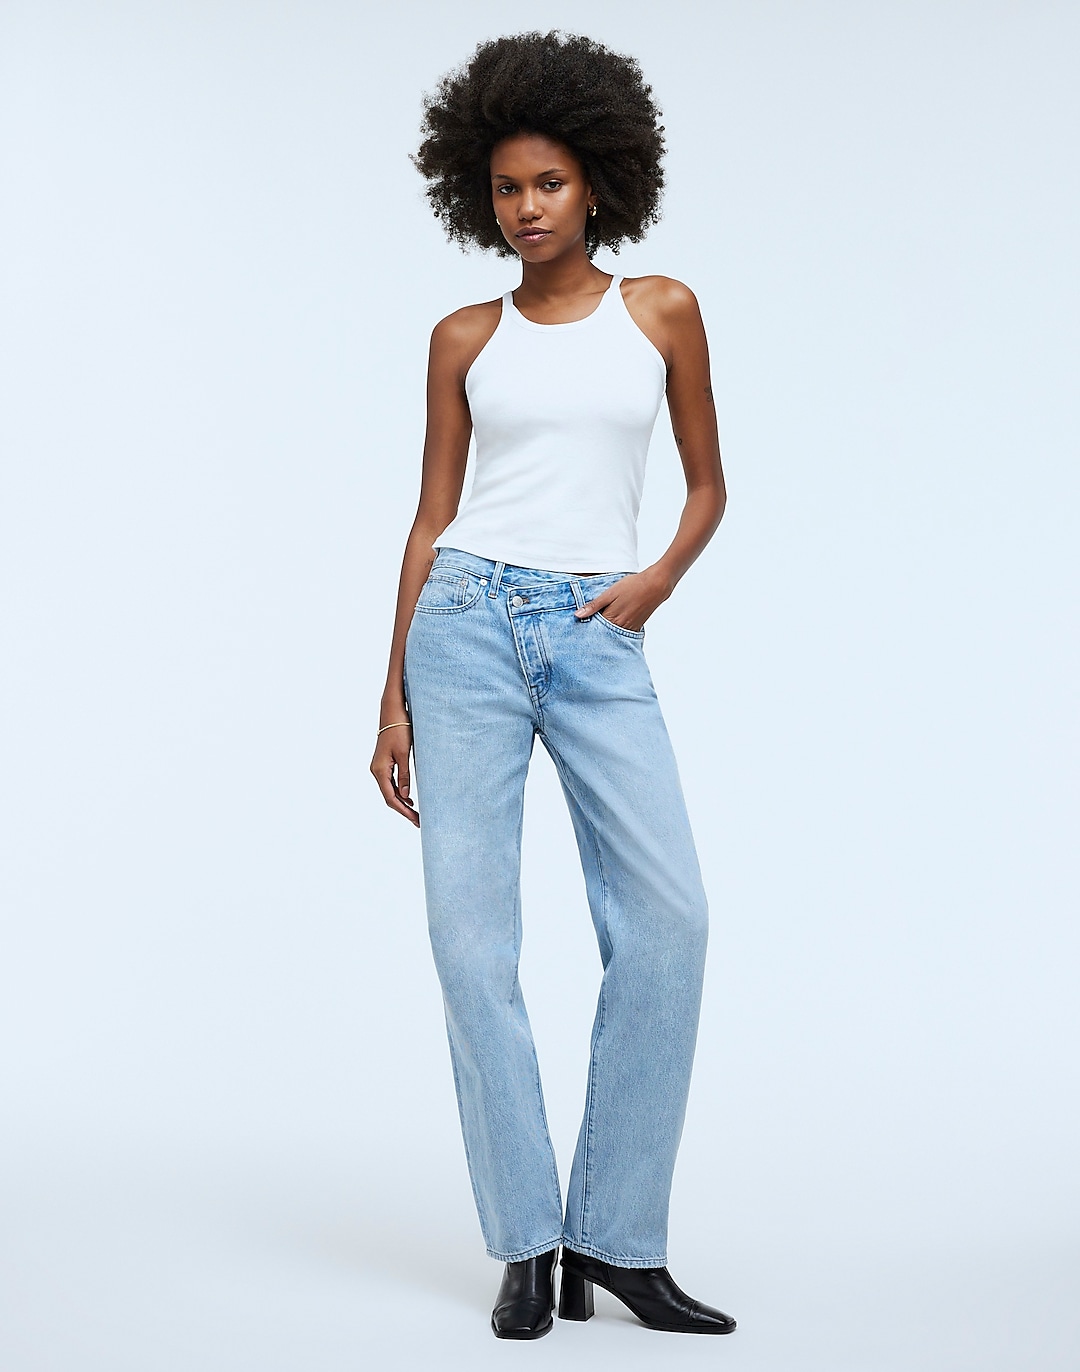 Low-Slung Straight Jeans in Sevilla Wash: Cross-Tab Edition | Madewell